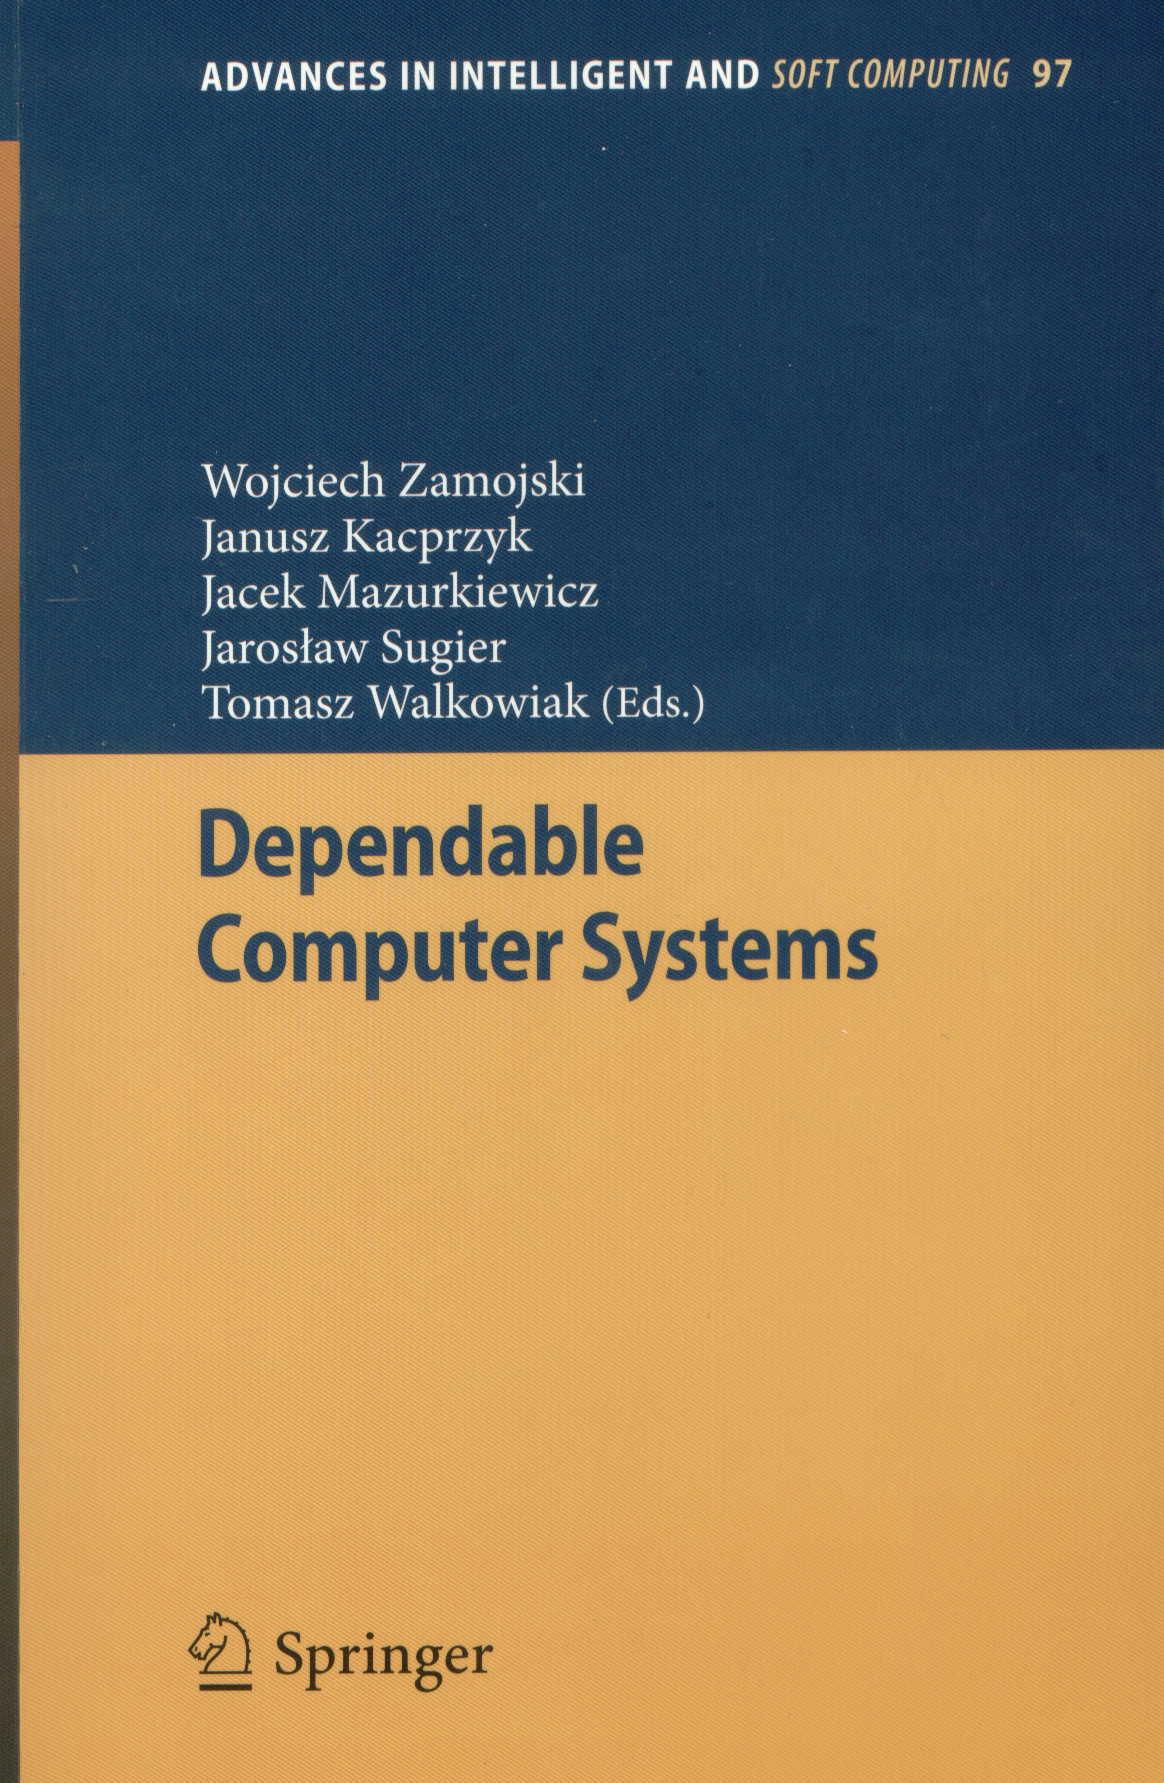 Dependable Computer Systems